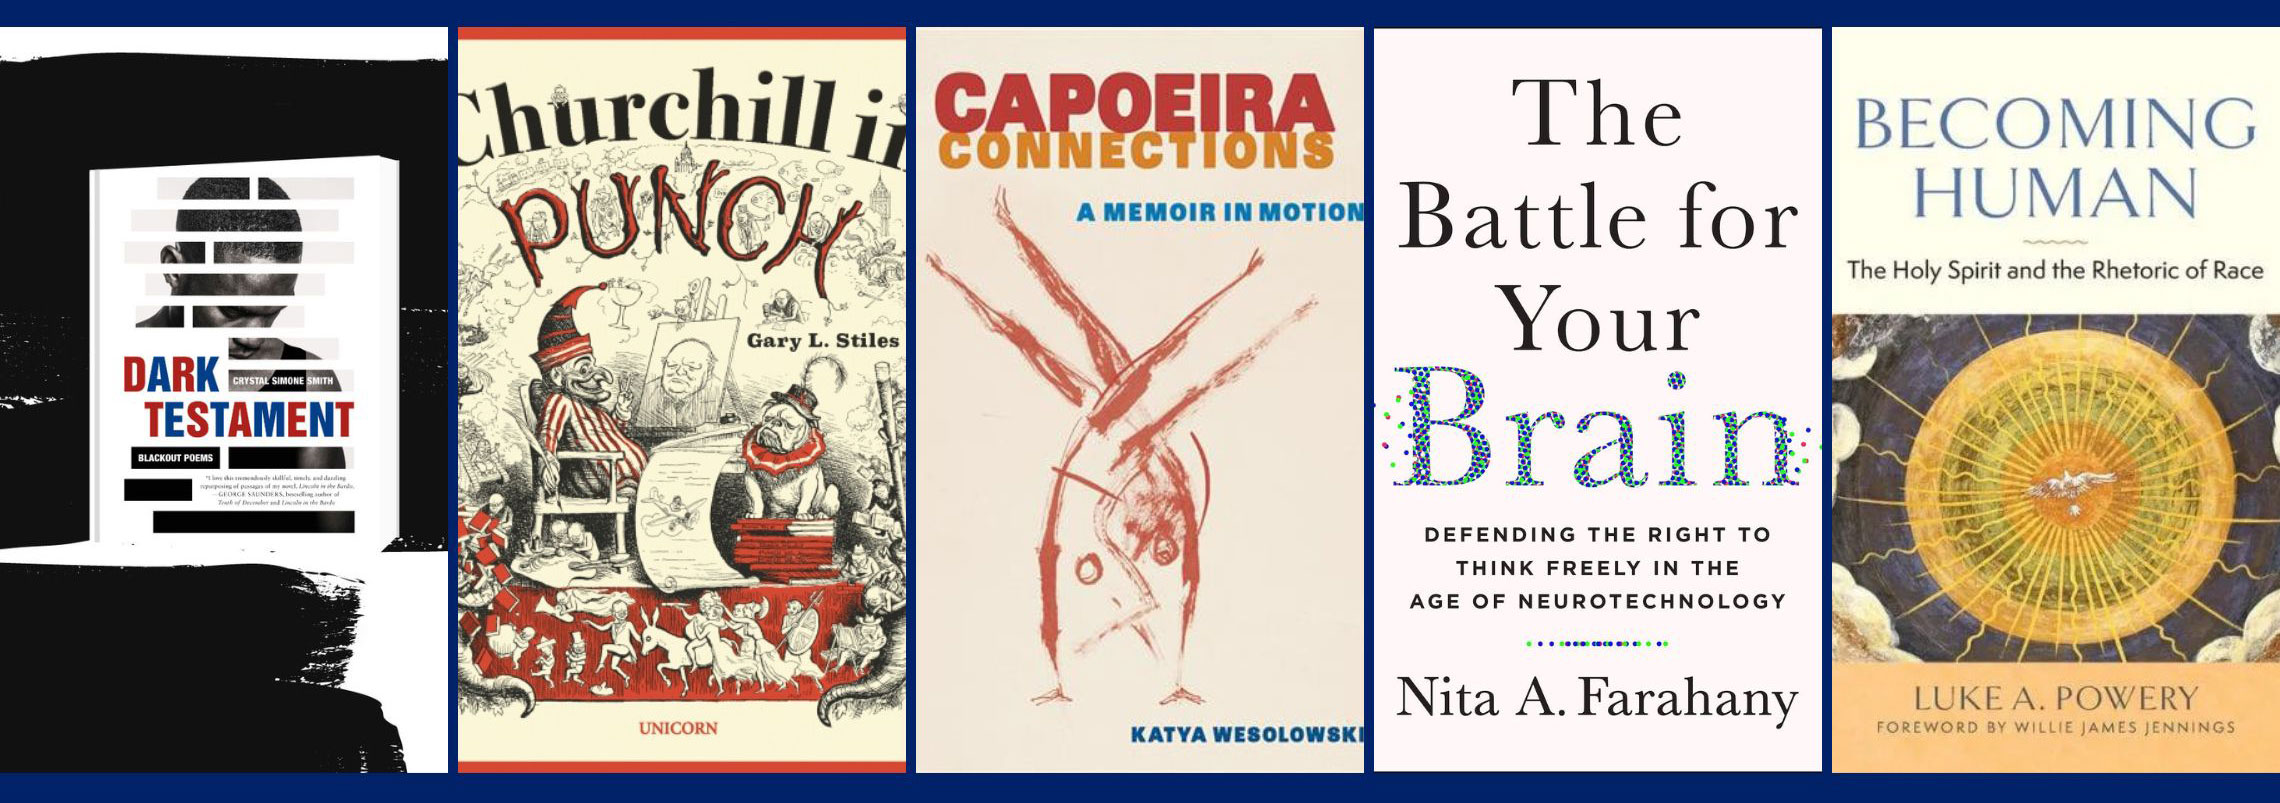 book covers: Dark Testament, Churchill in Punch, Capoeira Connections, The Battle for Your Brain and Becoming Human: the Holy spirit and the Rhetoric of Race